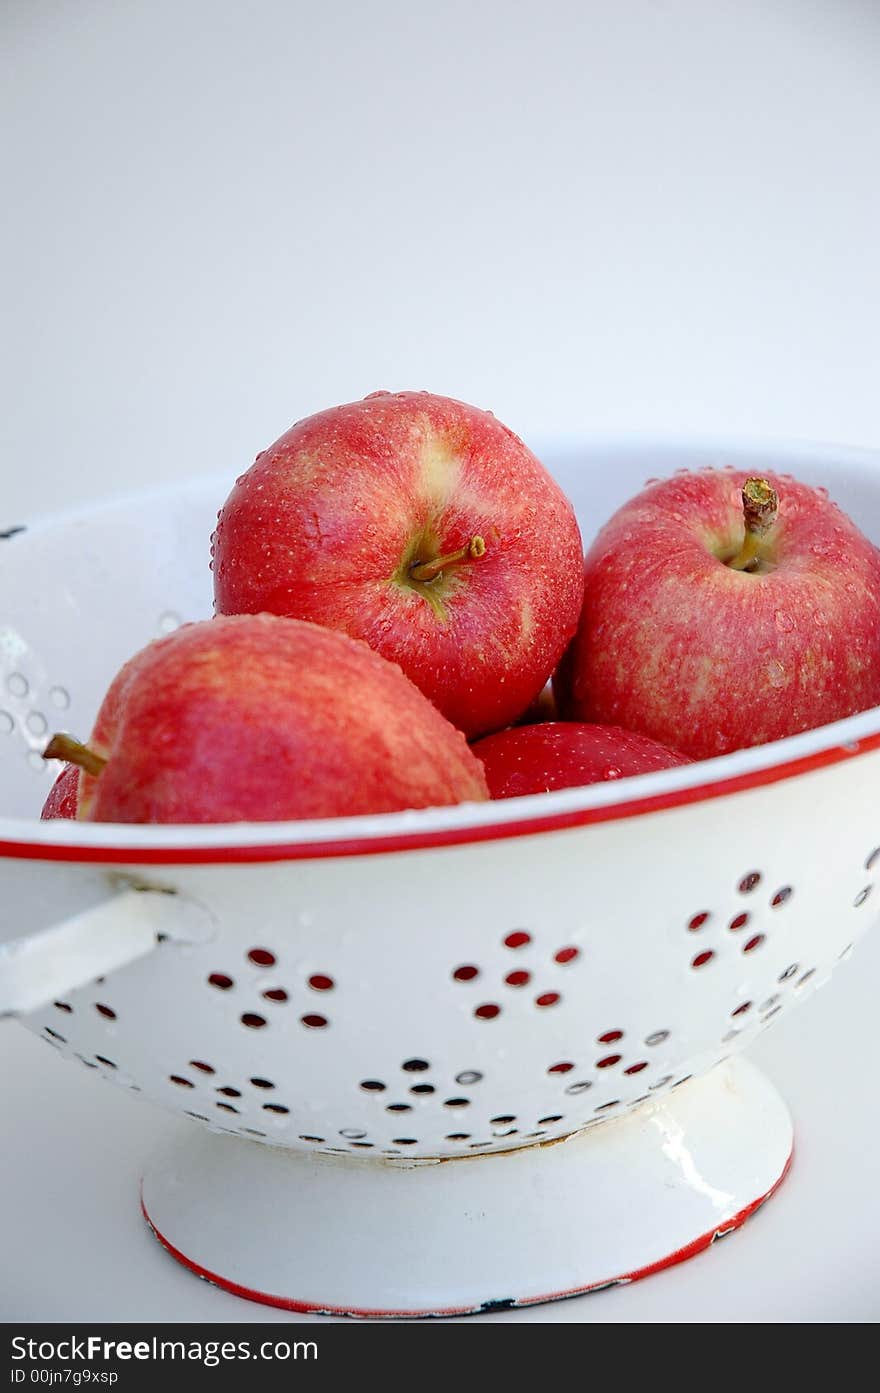 Red gala apples in white and red colander, white background. Red gala apples in white and red colander, white background